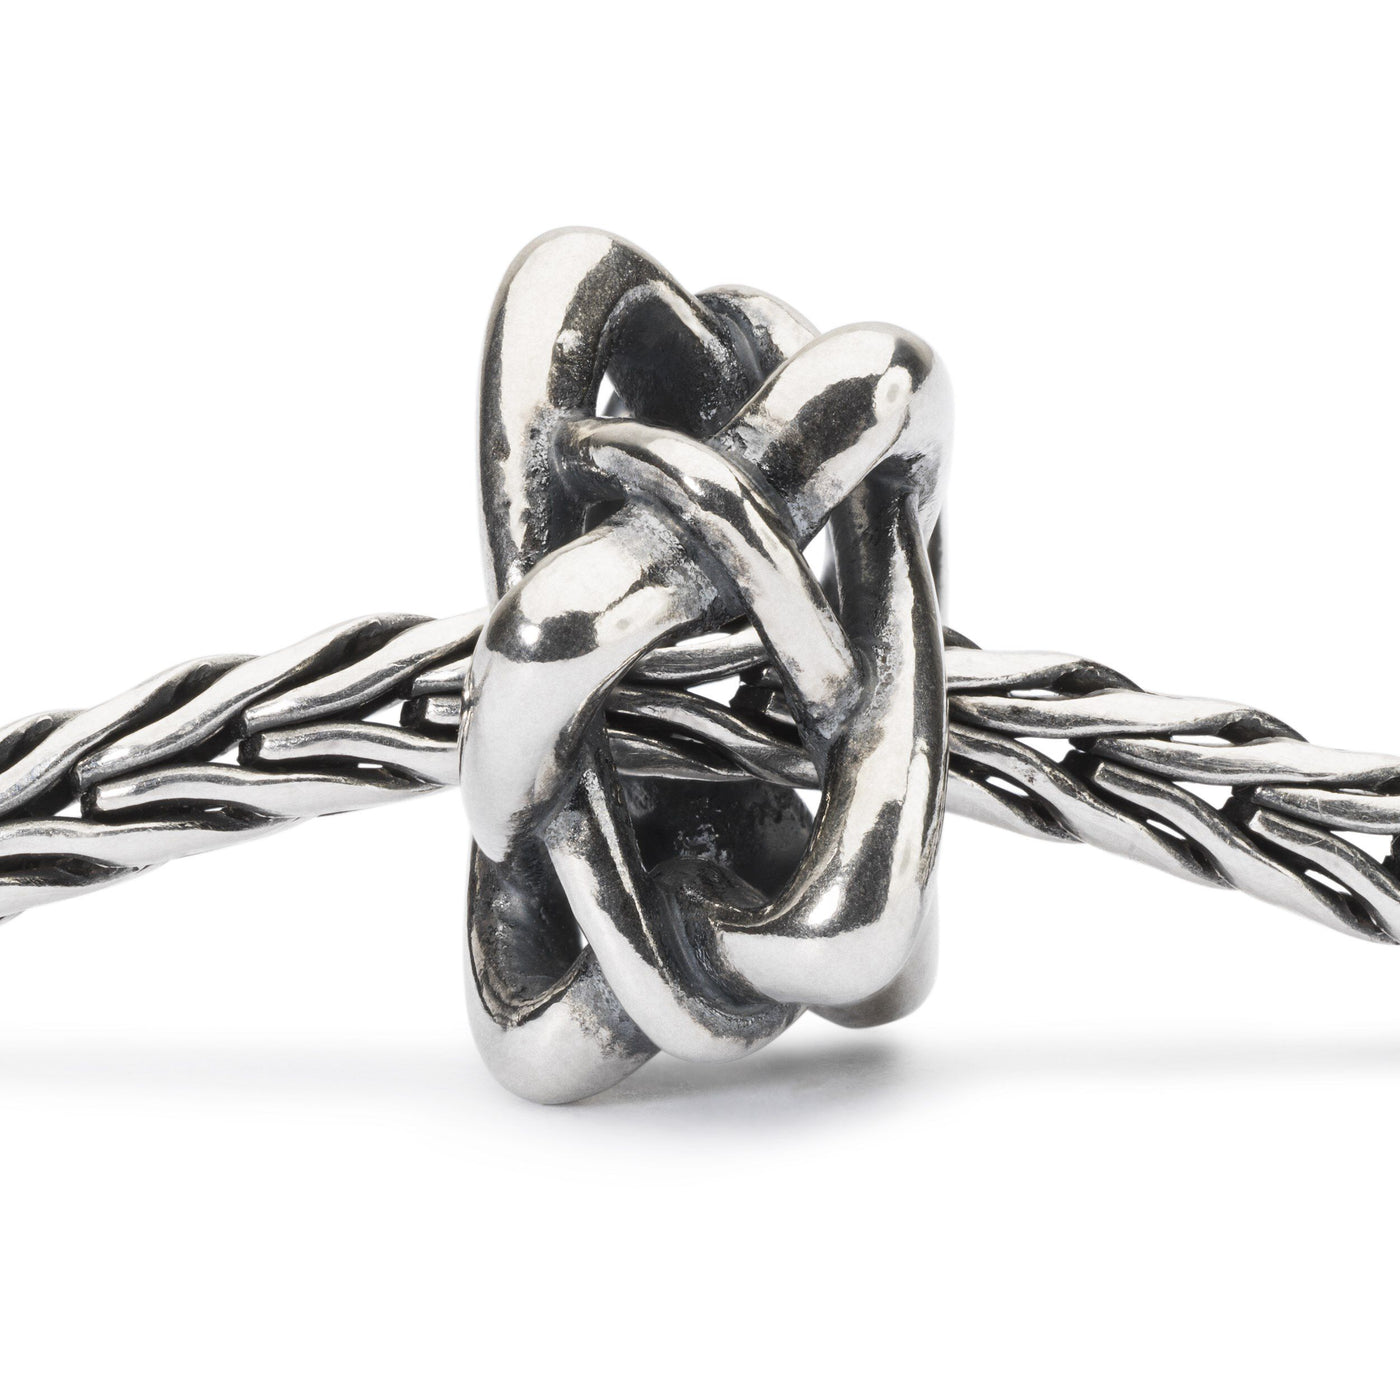 Come Together - Trollbeads Canada